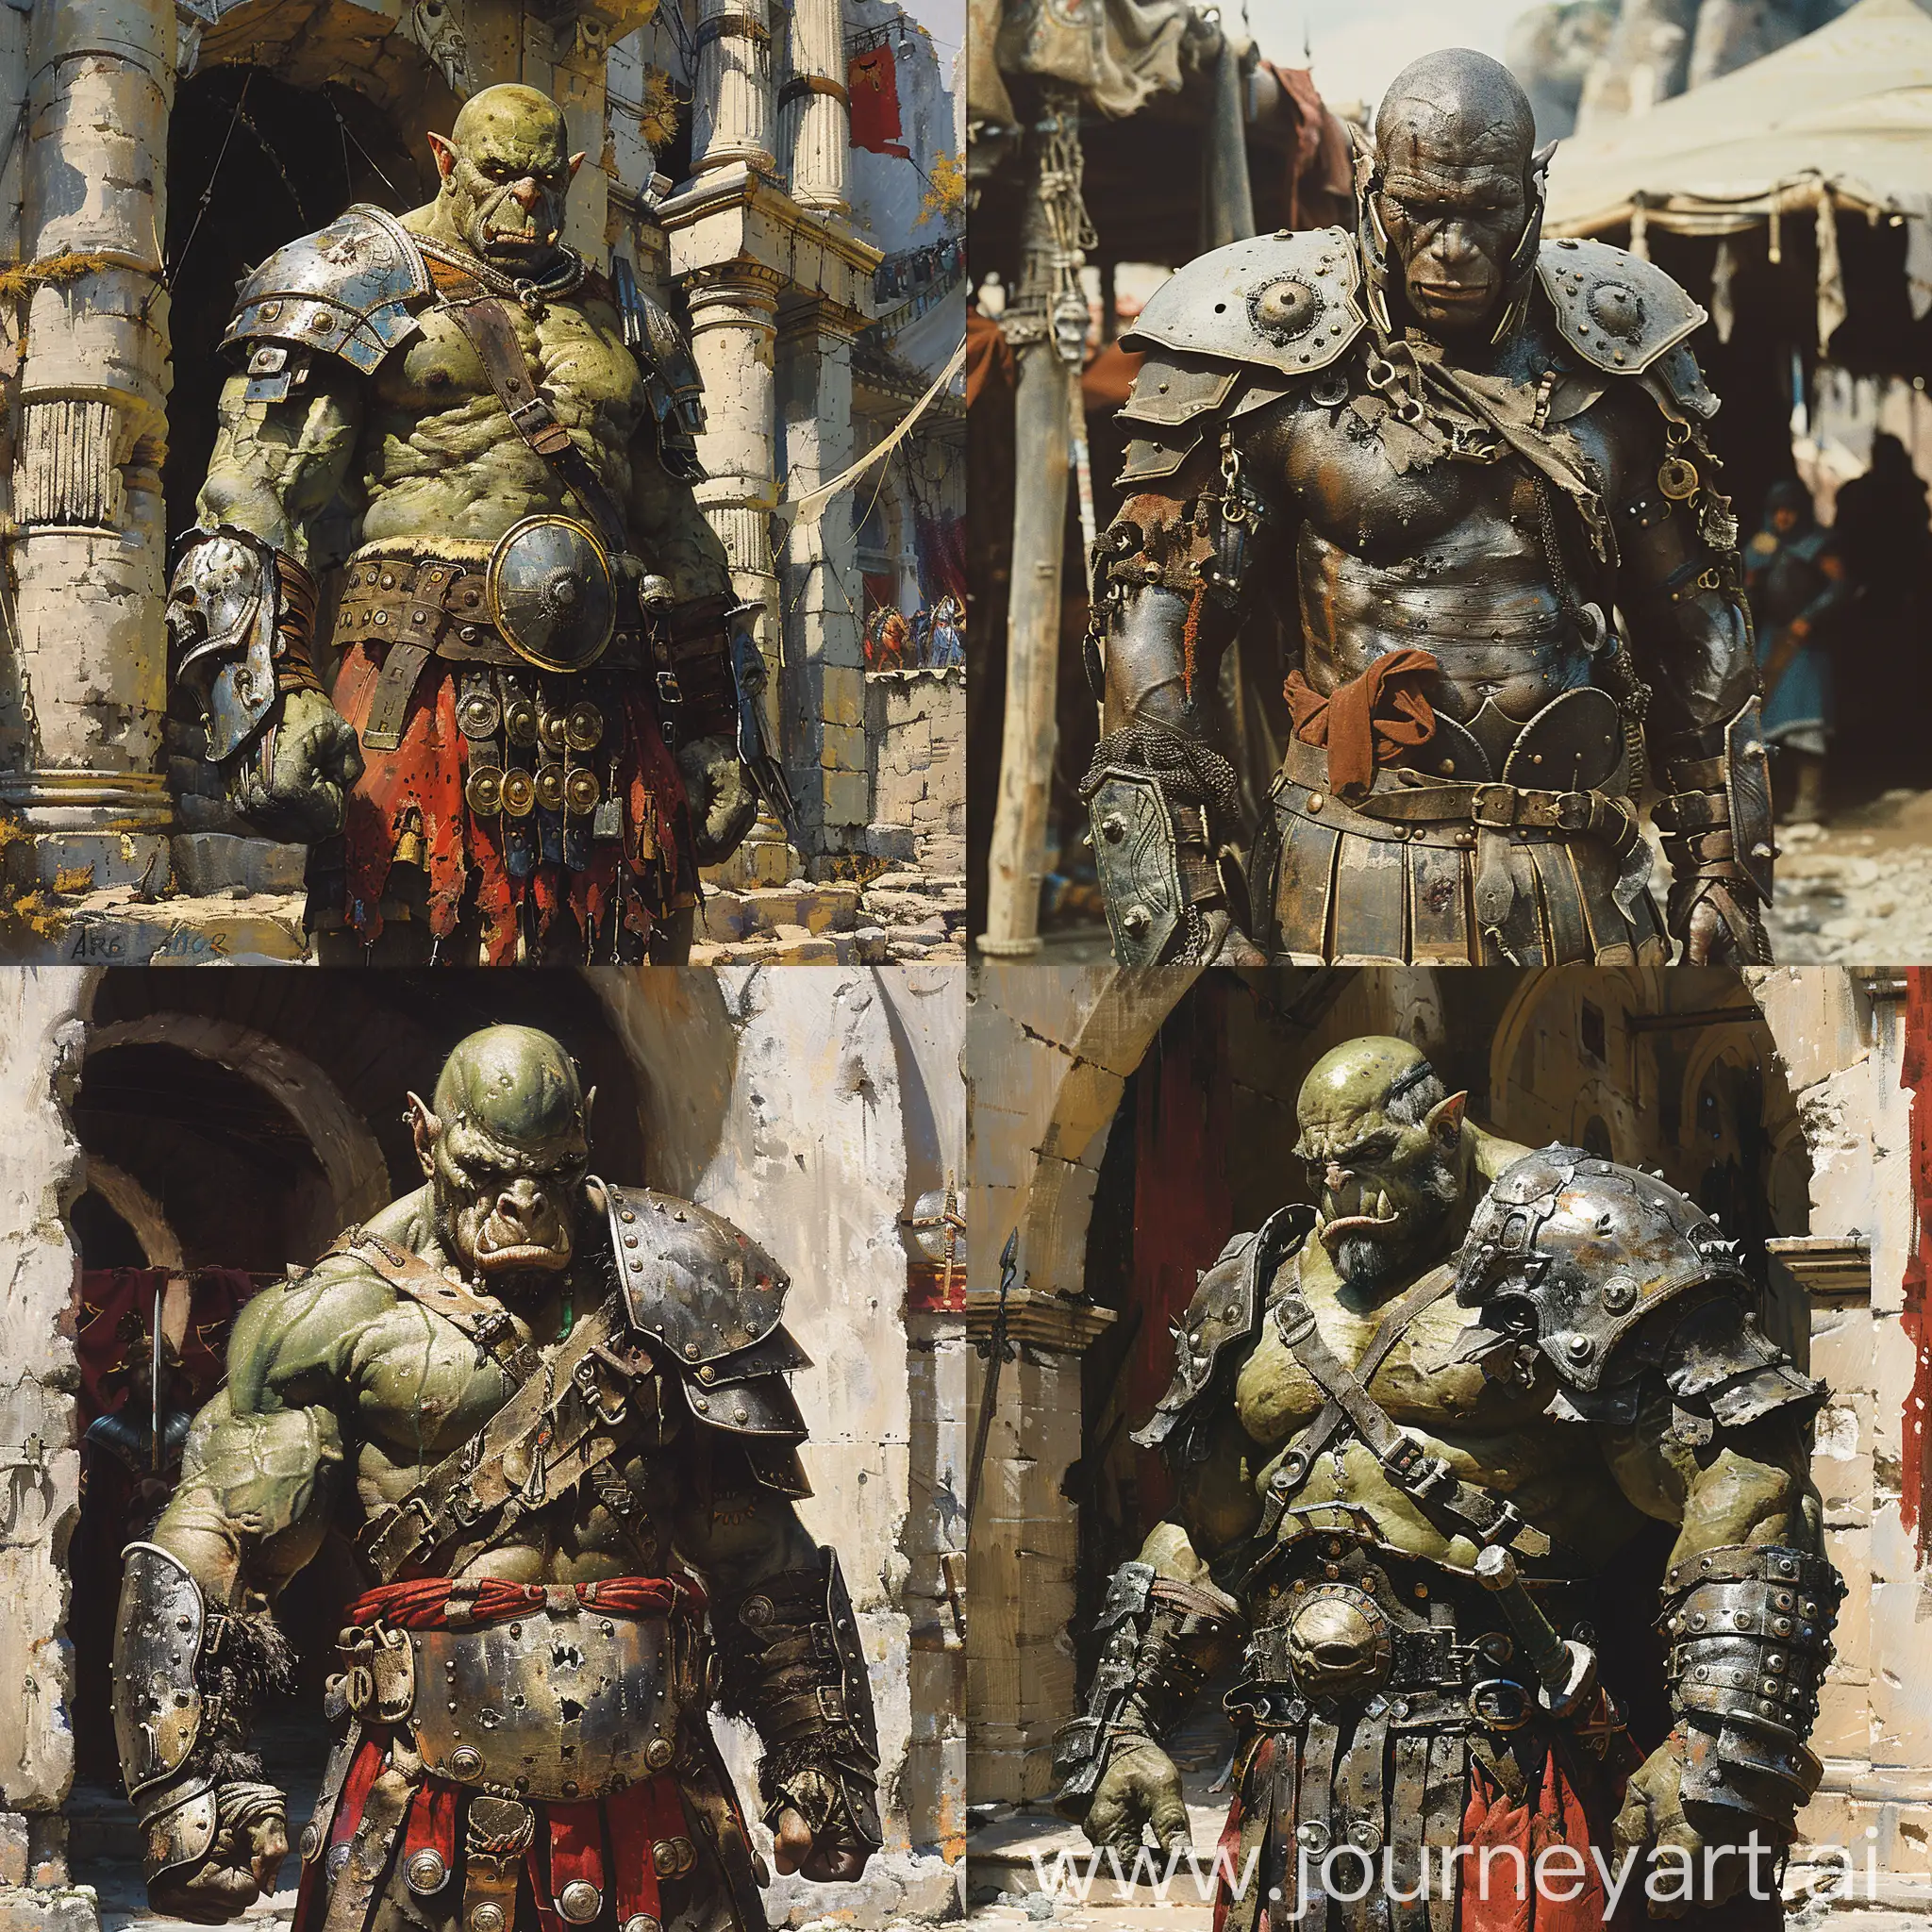 orc wearing full armor. orc soldier guarding the entry of a war tent. Sandalpunk, by frank frazetta, ancient roman uniform. Burly strongman physique  --stylize 750 --v 6